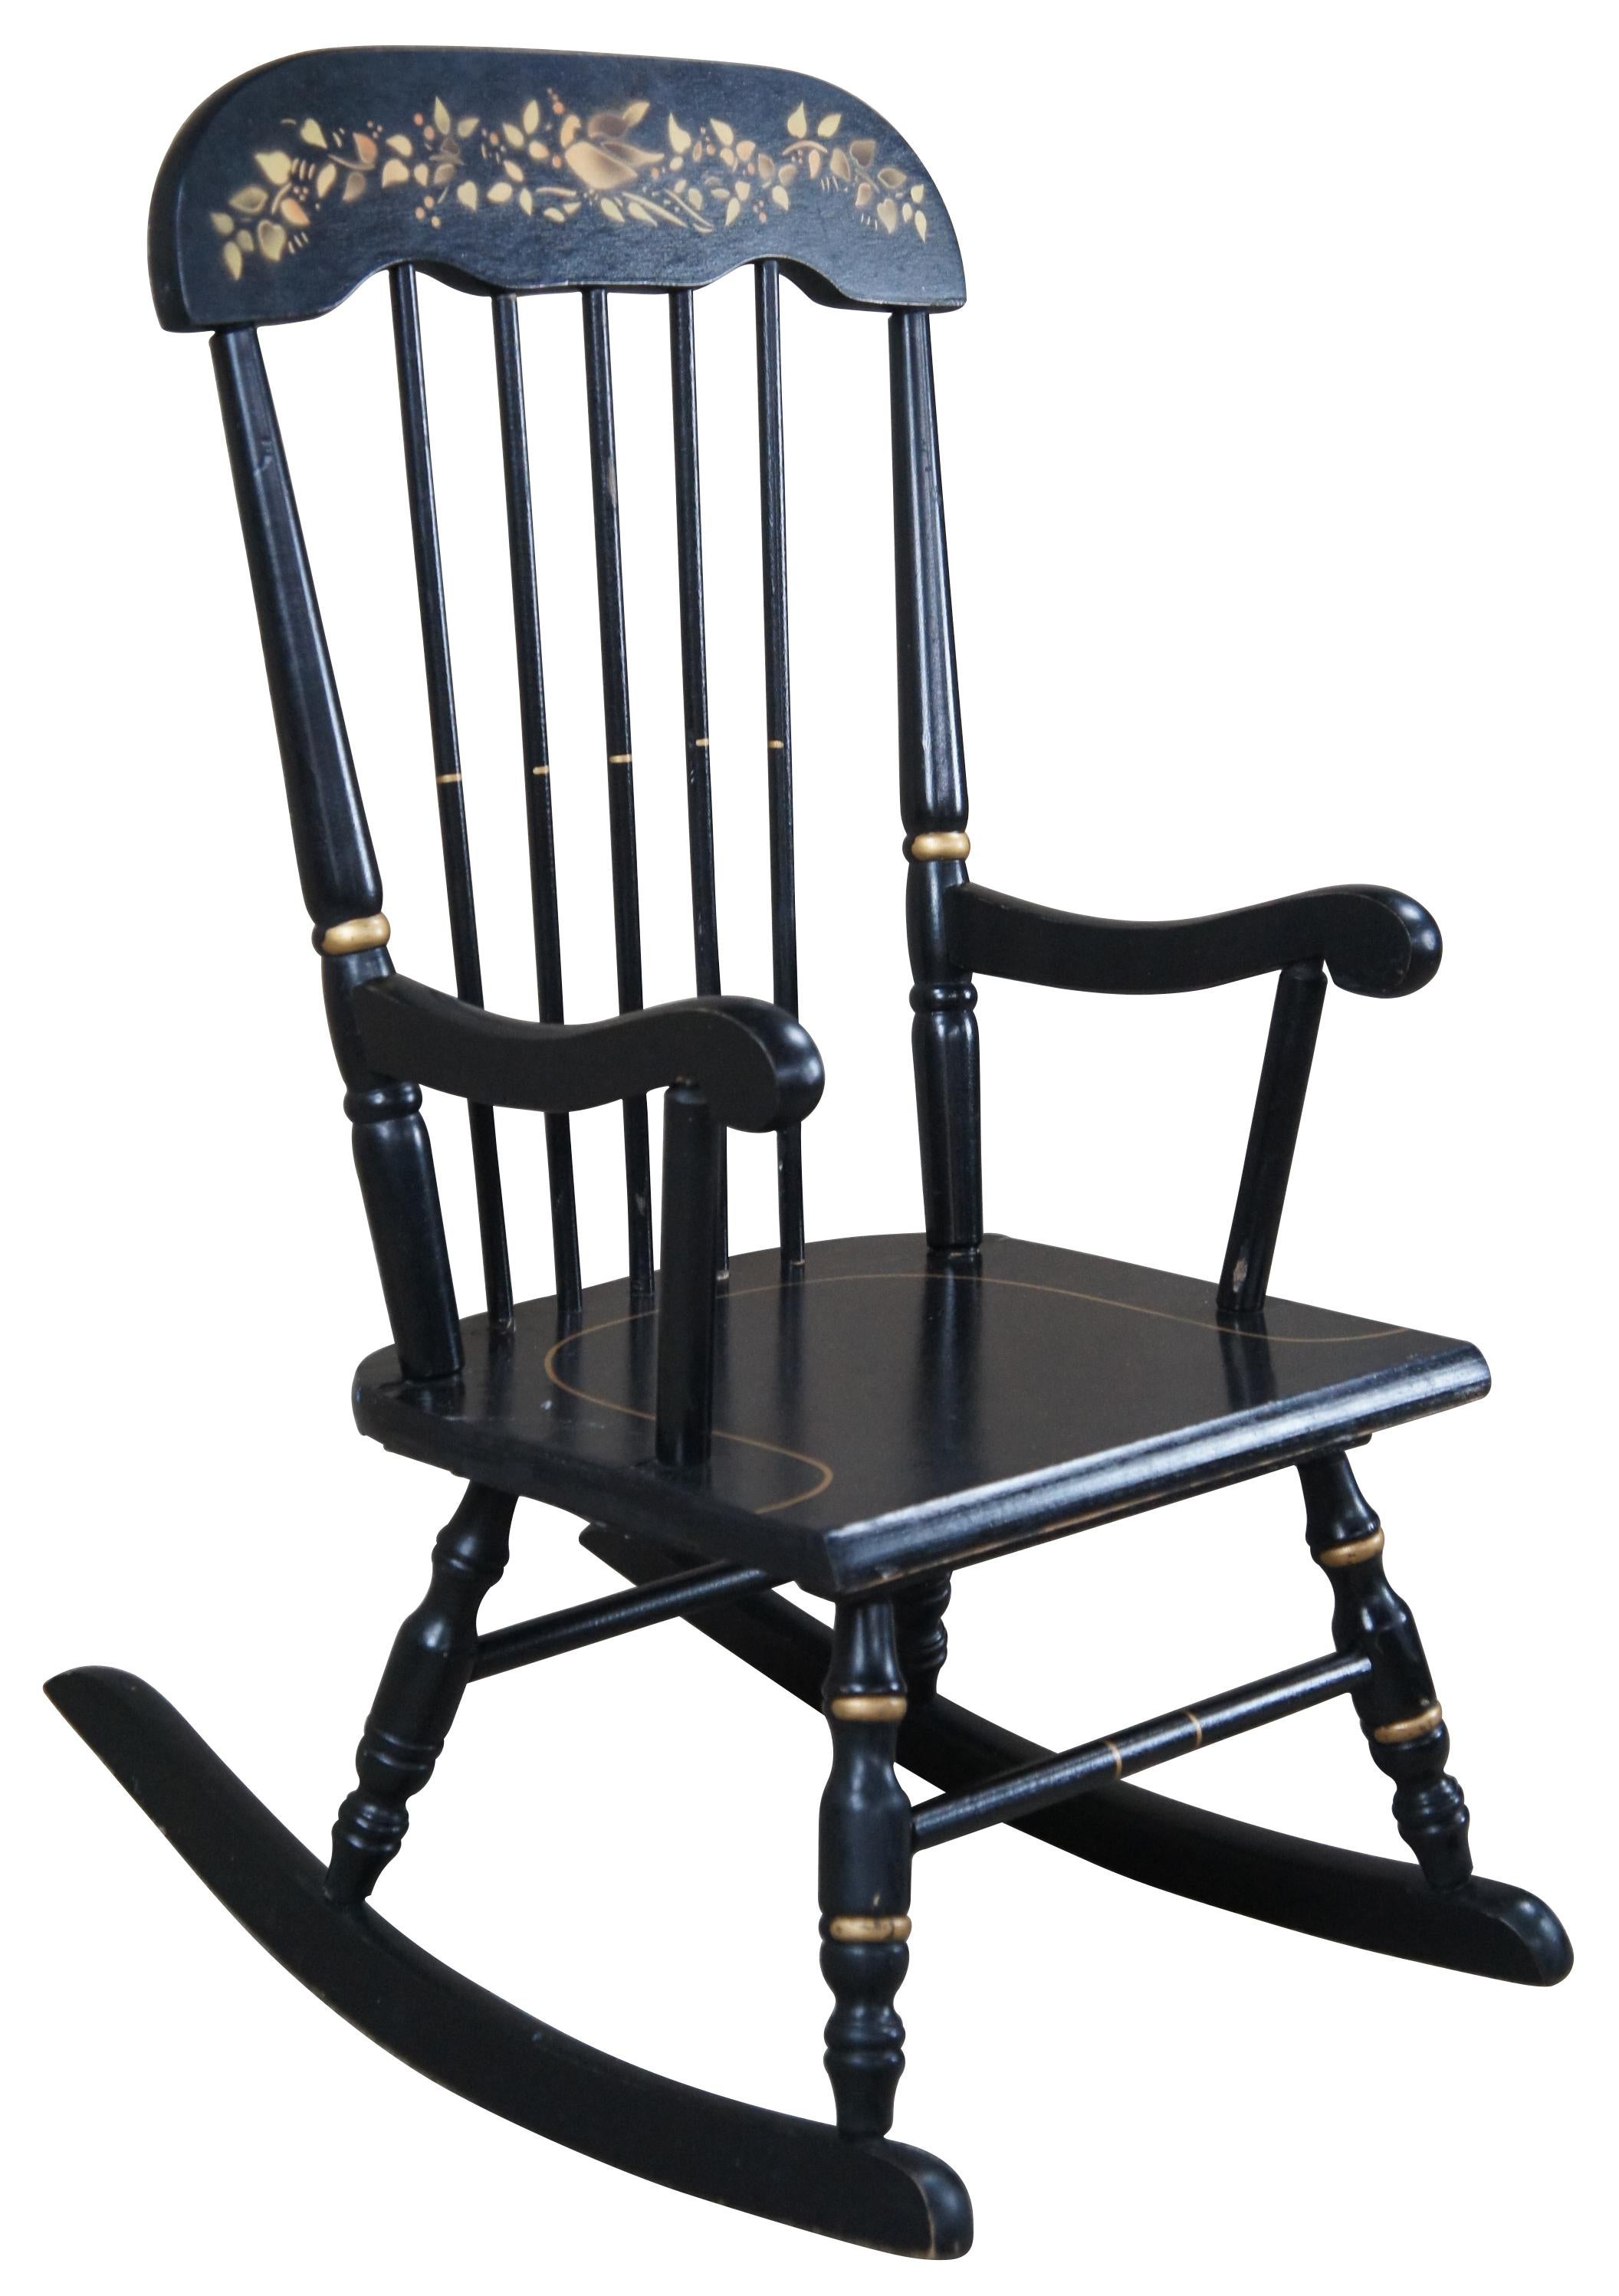 Vintage Hitchcock or Boston style spindle back children's rocking chair. Black with gold trim and stenciled back.